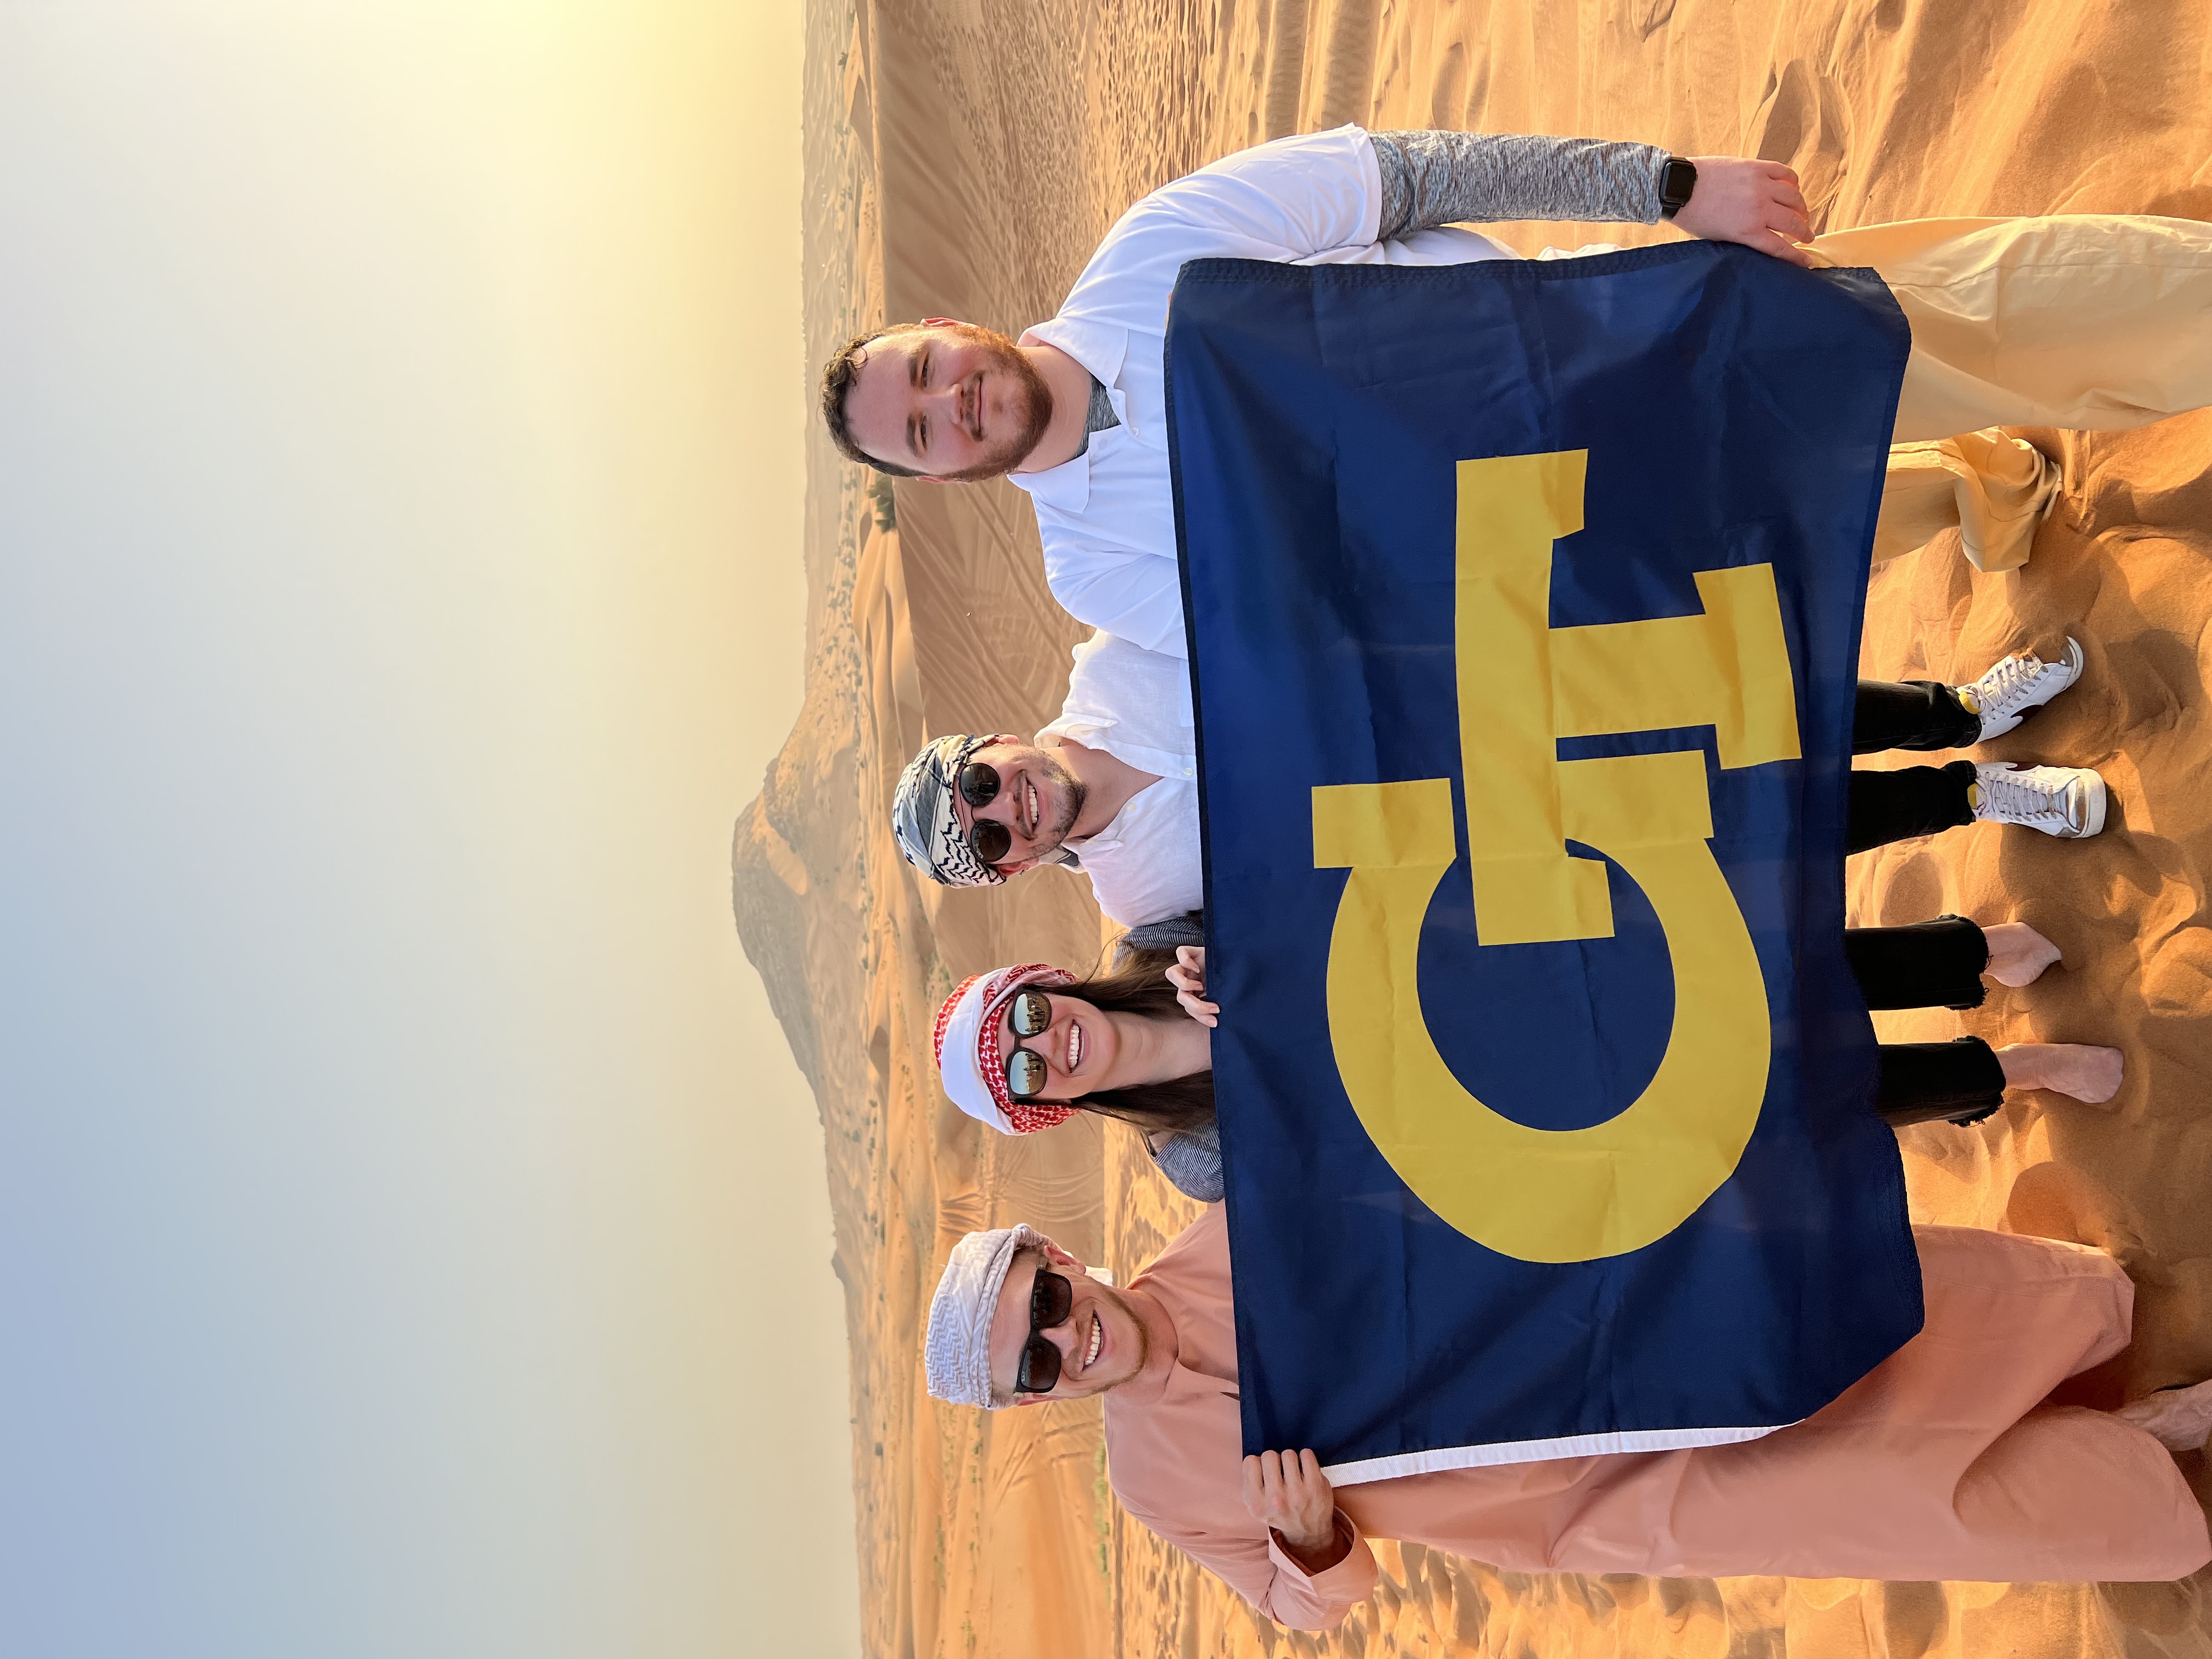 A group of students hold a Georgia Tech flag in the desert